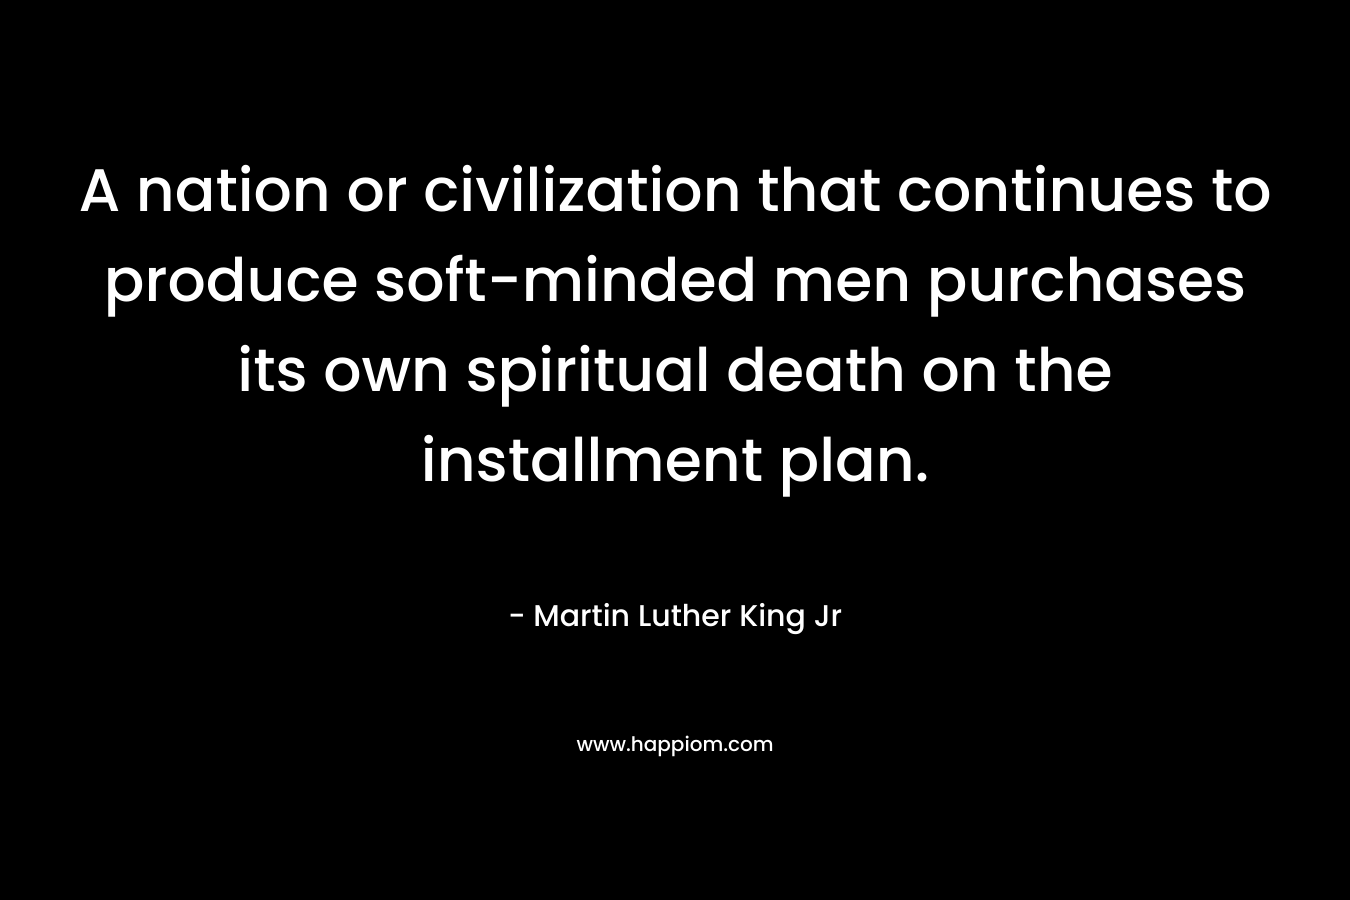 A nation or civilization that continues to produce soft-minded men purchases its own spiritual death on the installment plan. – Martin Luther King Jr